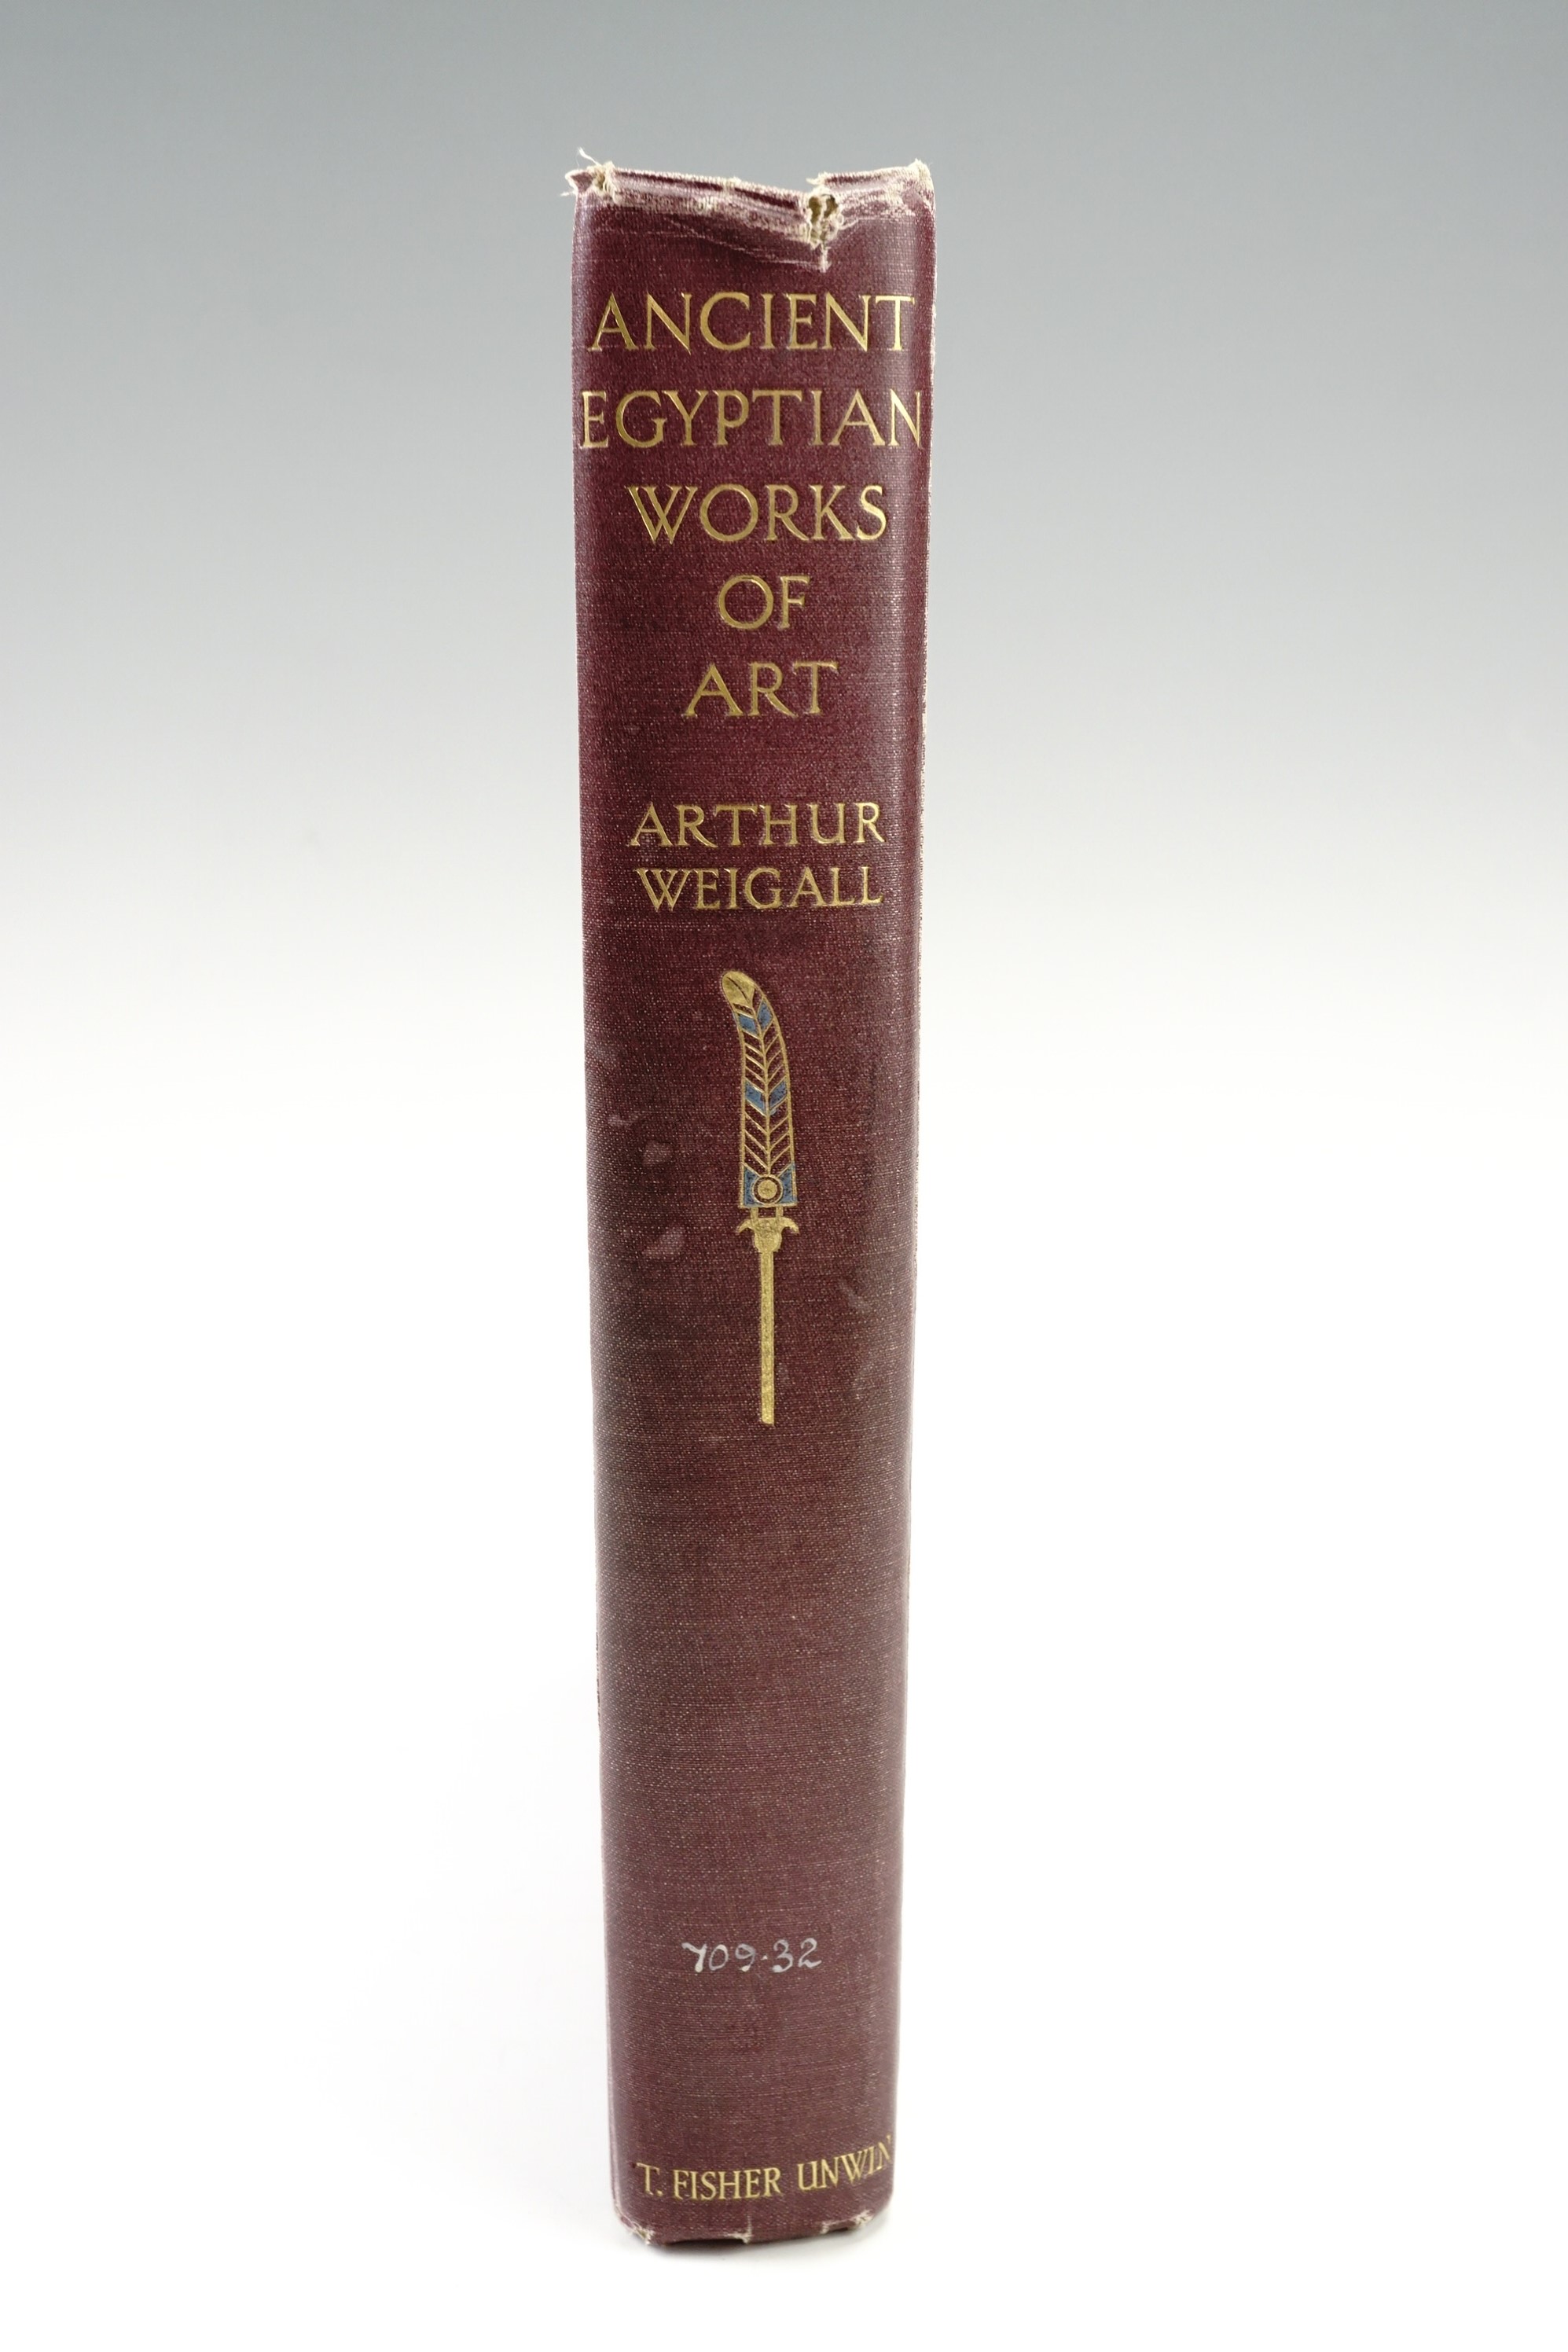 Arthur Weigall, "Ancient Egyptian Works of Art", Fisher Unwin Ltd, 1924, ex-lib - Image 2 of 2